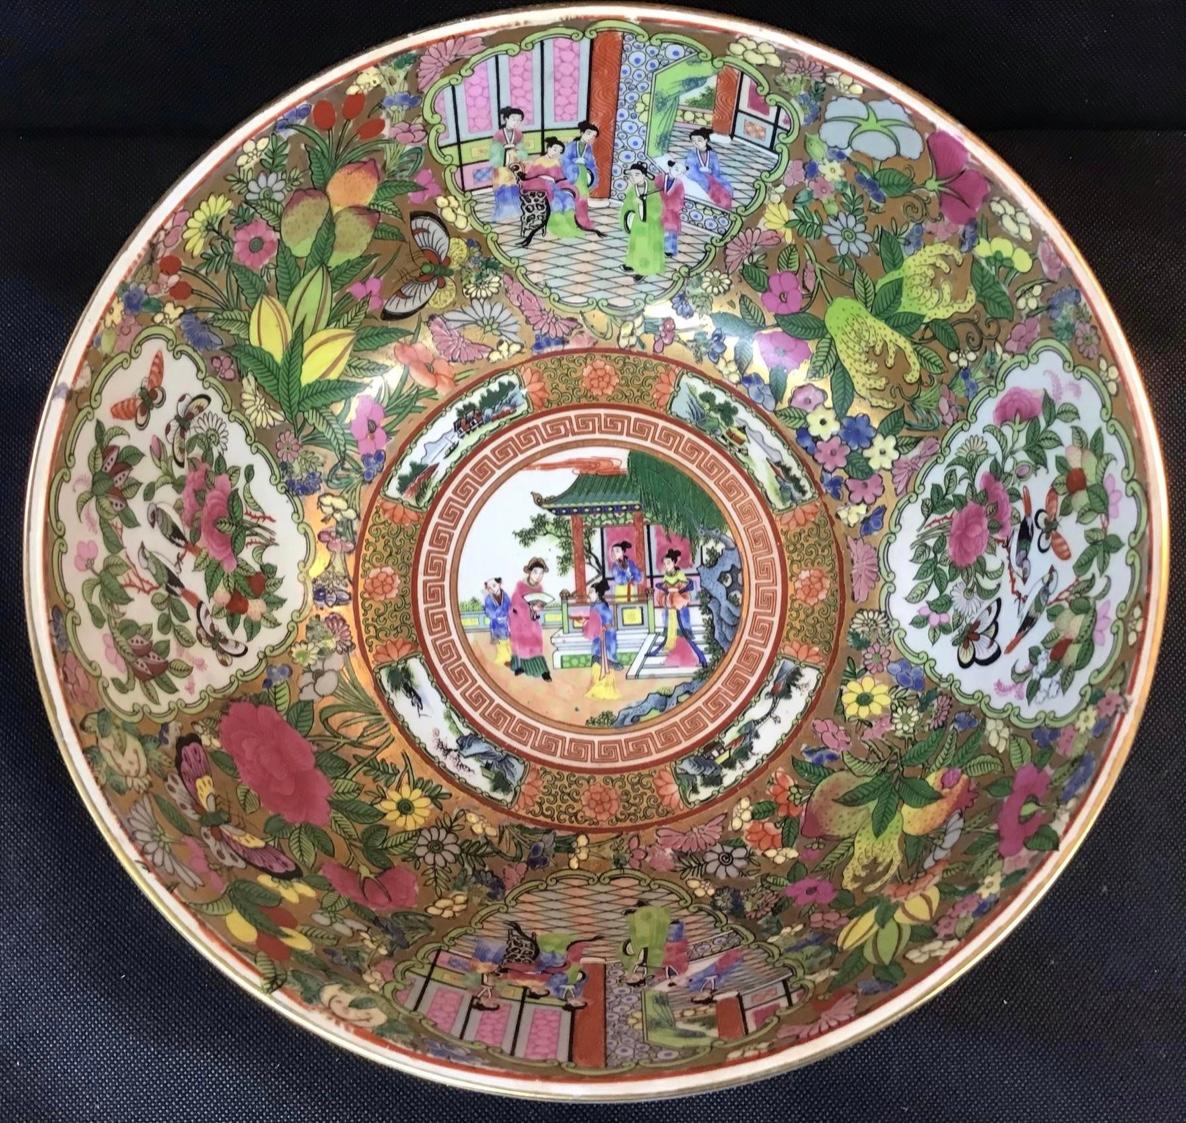 Traditional Chinese Rose Medallion large bowl with social scenes and nature motifs of butterflies, florals, and birds. A very nice larger size bowl! All hand painted with enamel and gilt accents. Stamped character mark on the bottom.